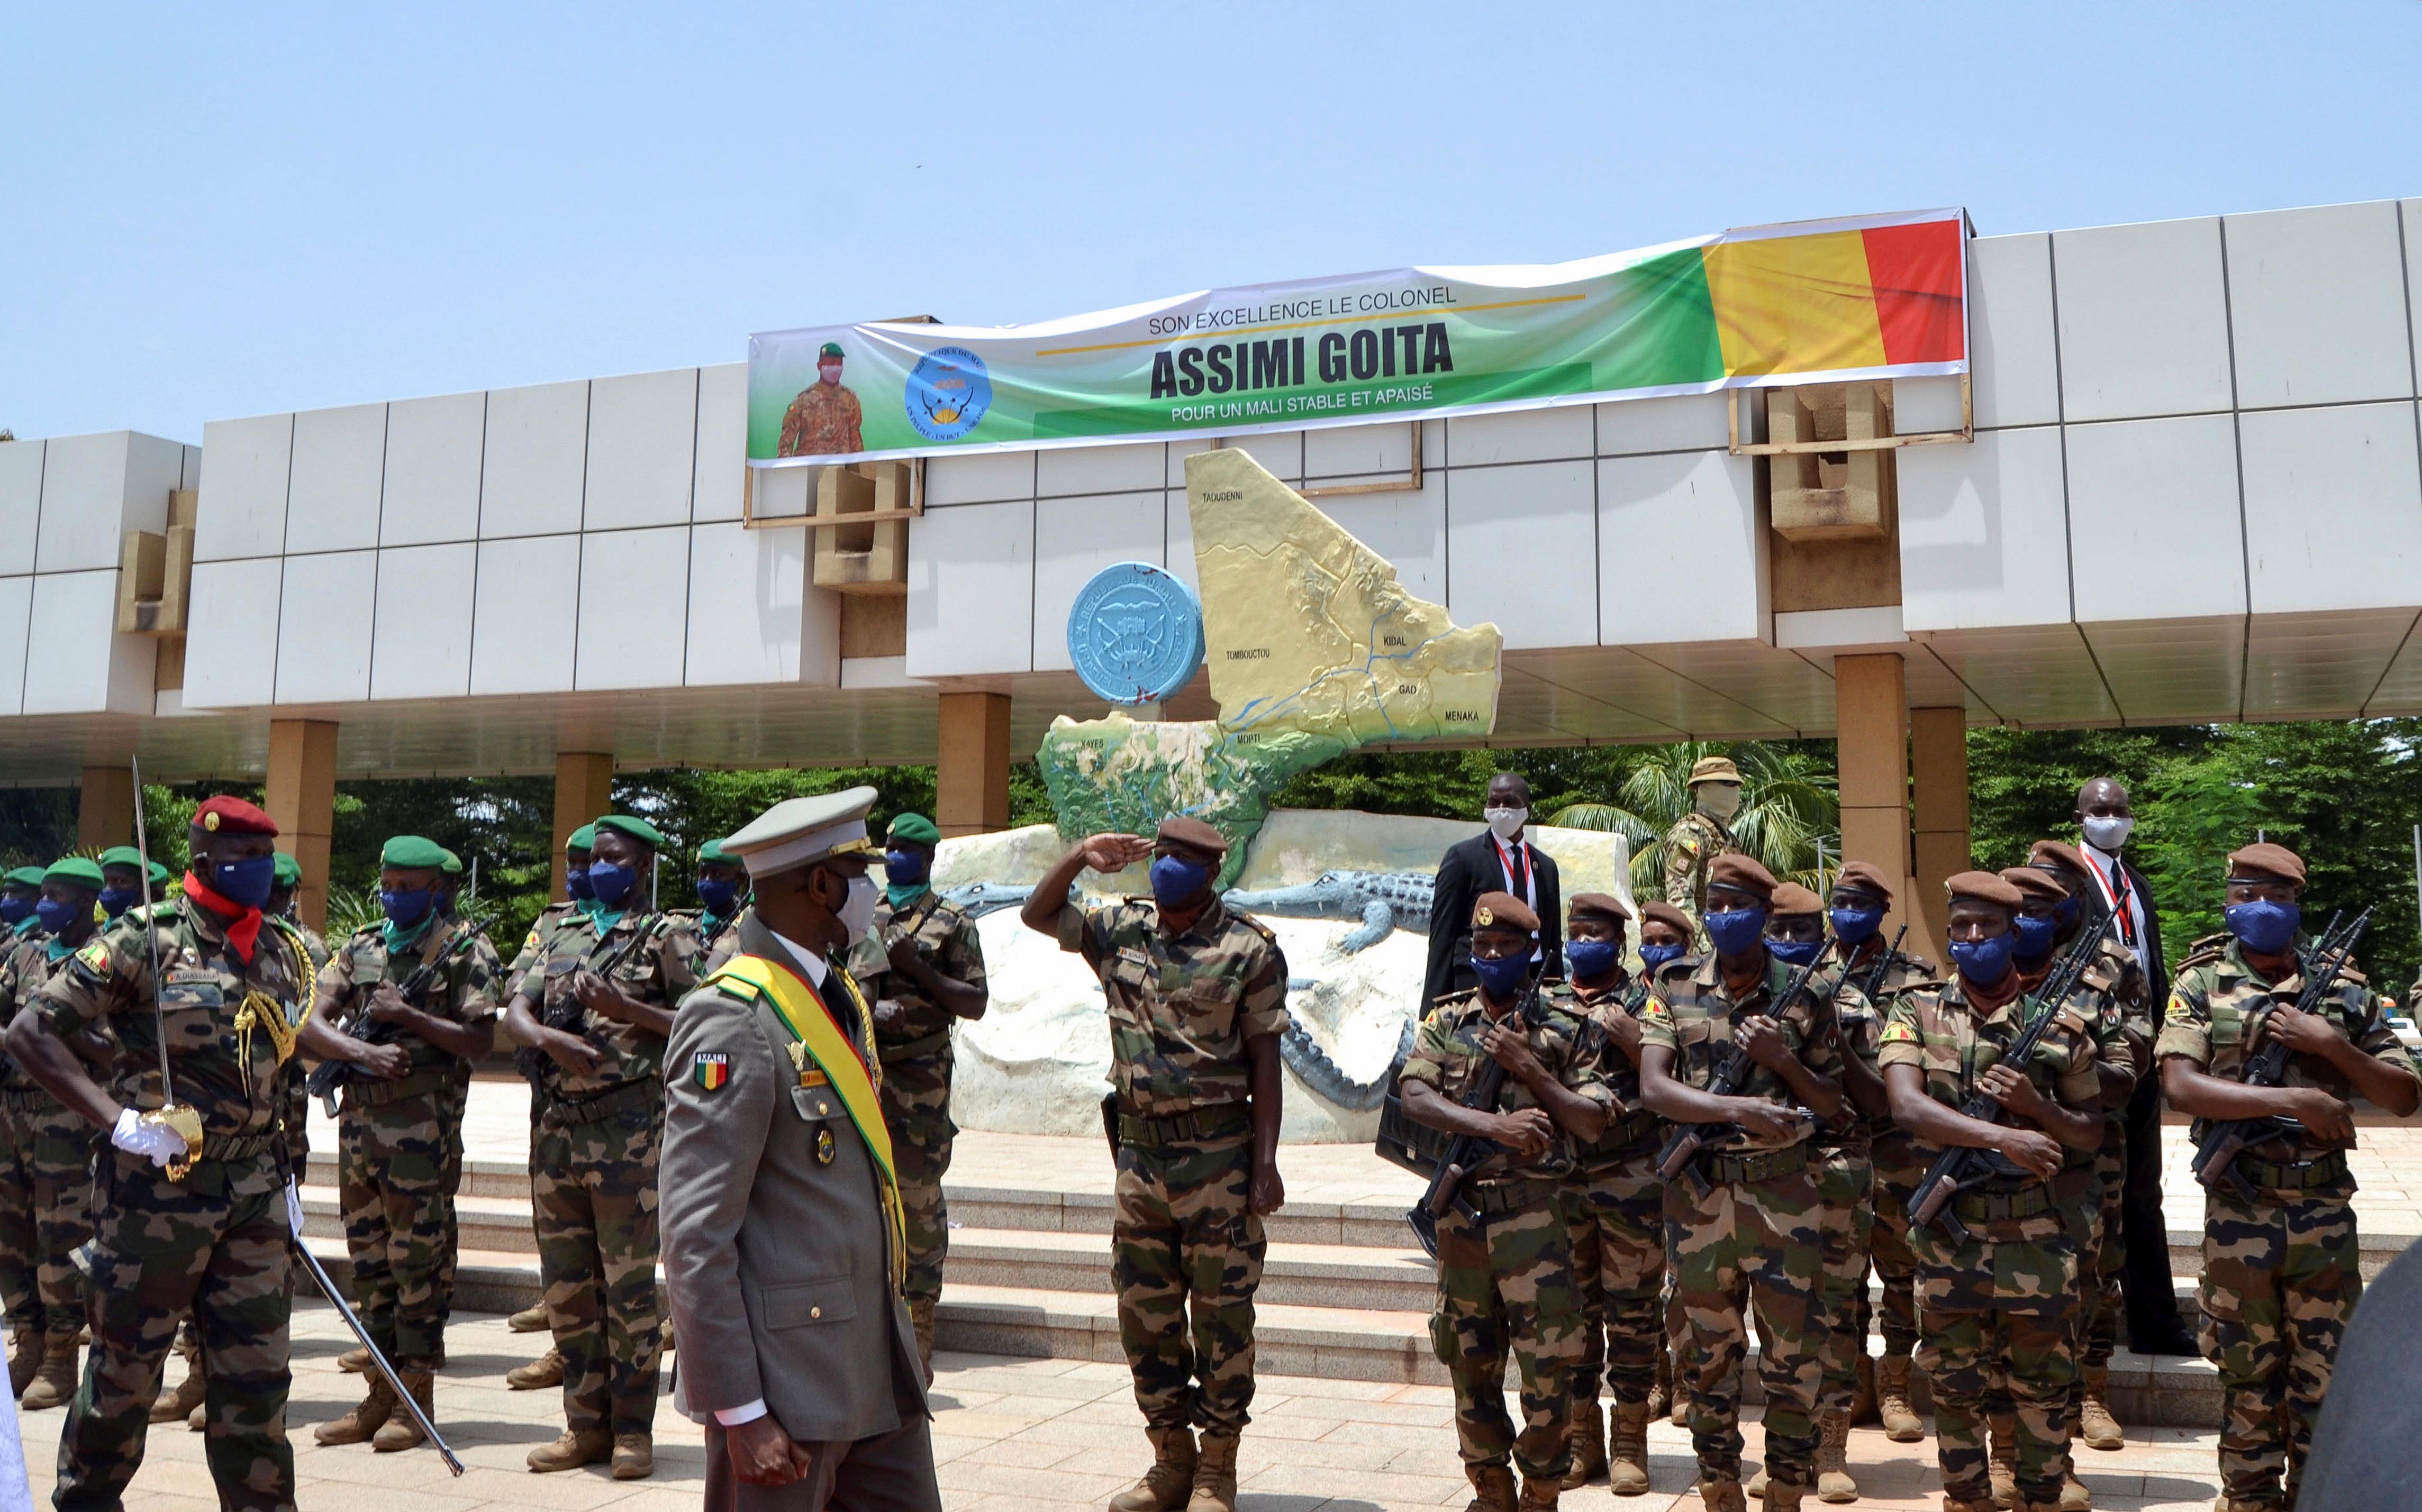 Col. Assimi Goïta is sworn in as Mali’s interim president on June 7, 2021. On May 24, Goïta overthrew the previous coup government, led by Bah Ndaw. 